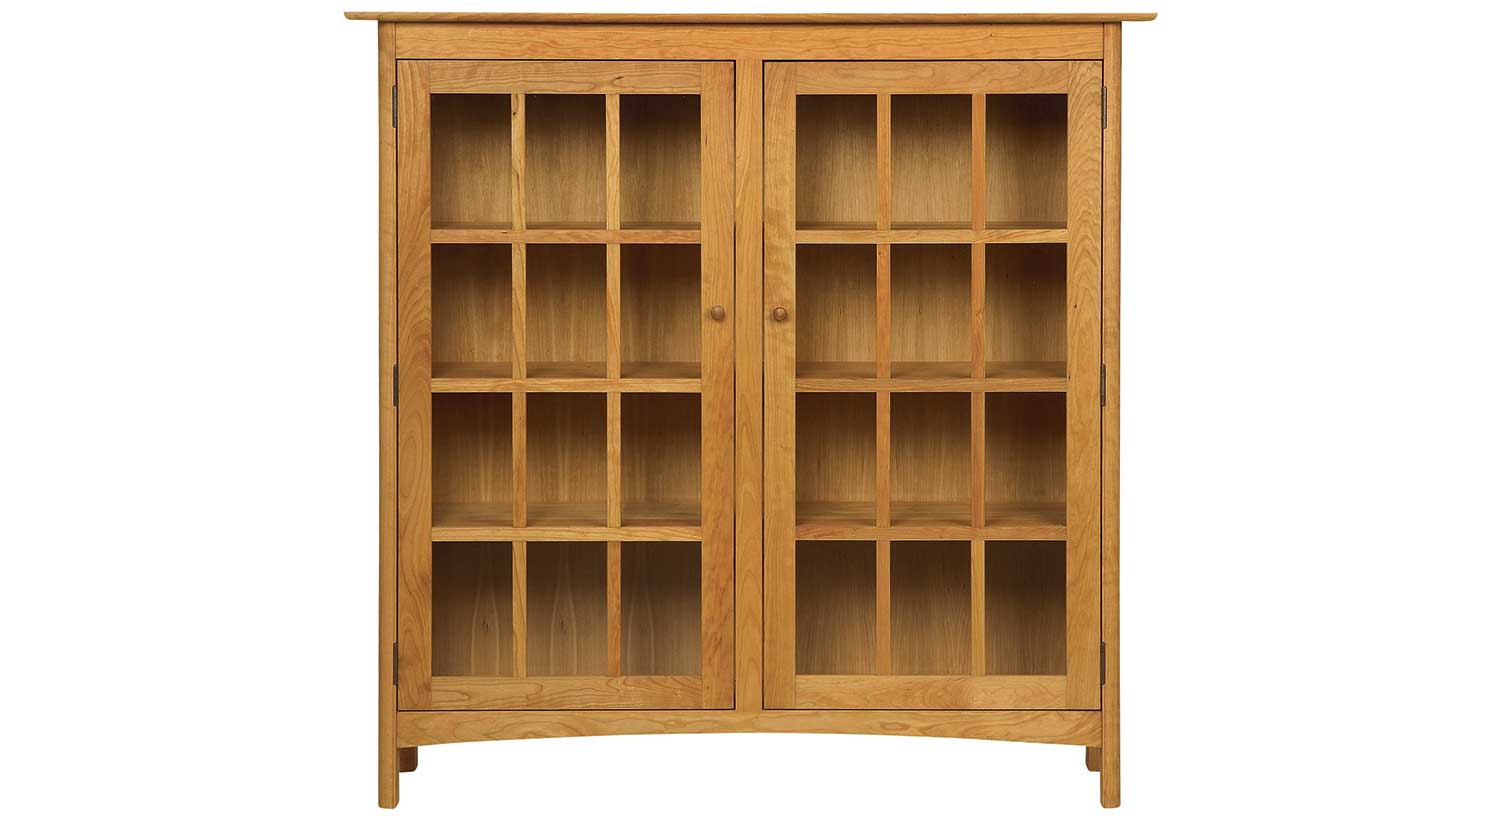 Circle Furniture Solid Wood Bookcase, Solid Oak Bookcase With Glass Doors